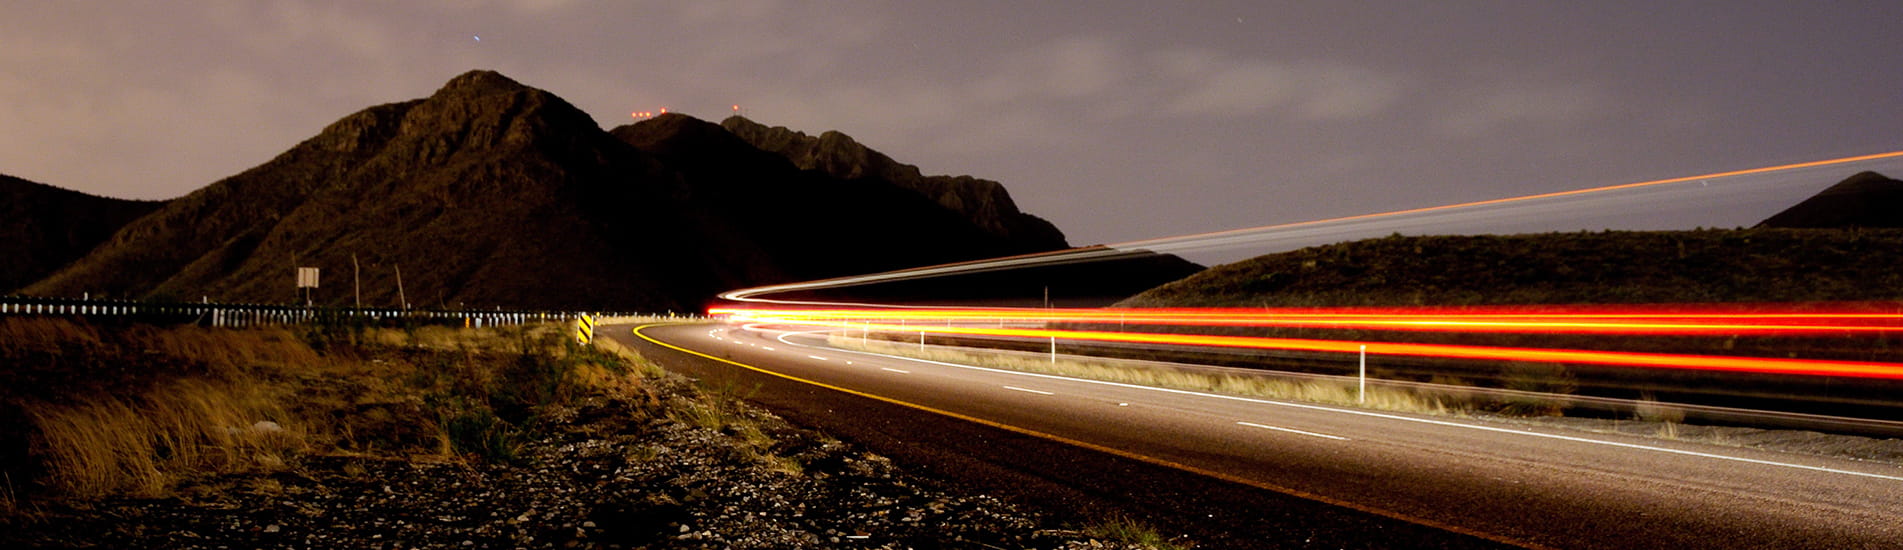 Highway at night with blurry lights and a mountain in the background.